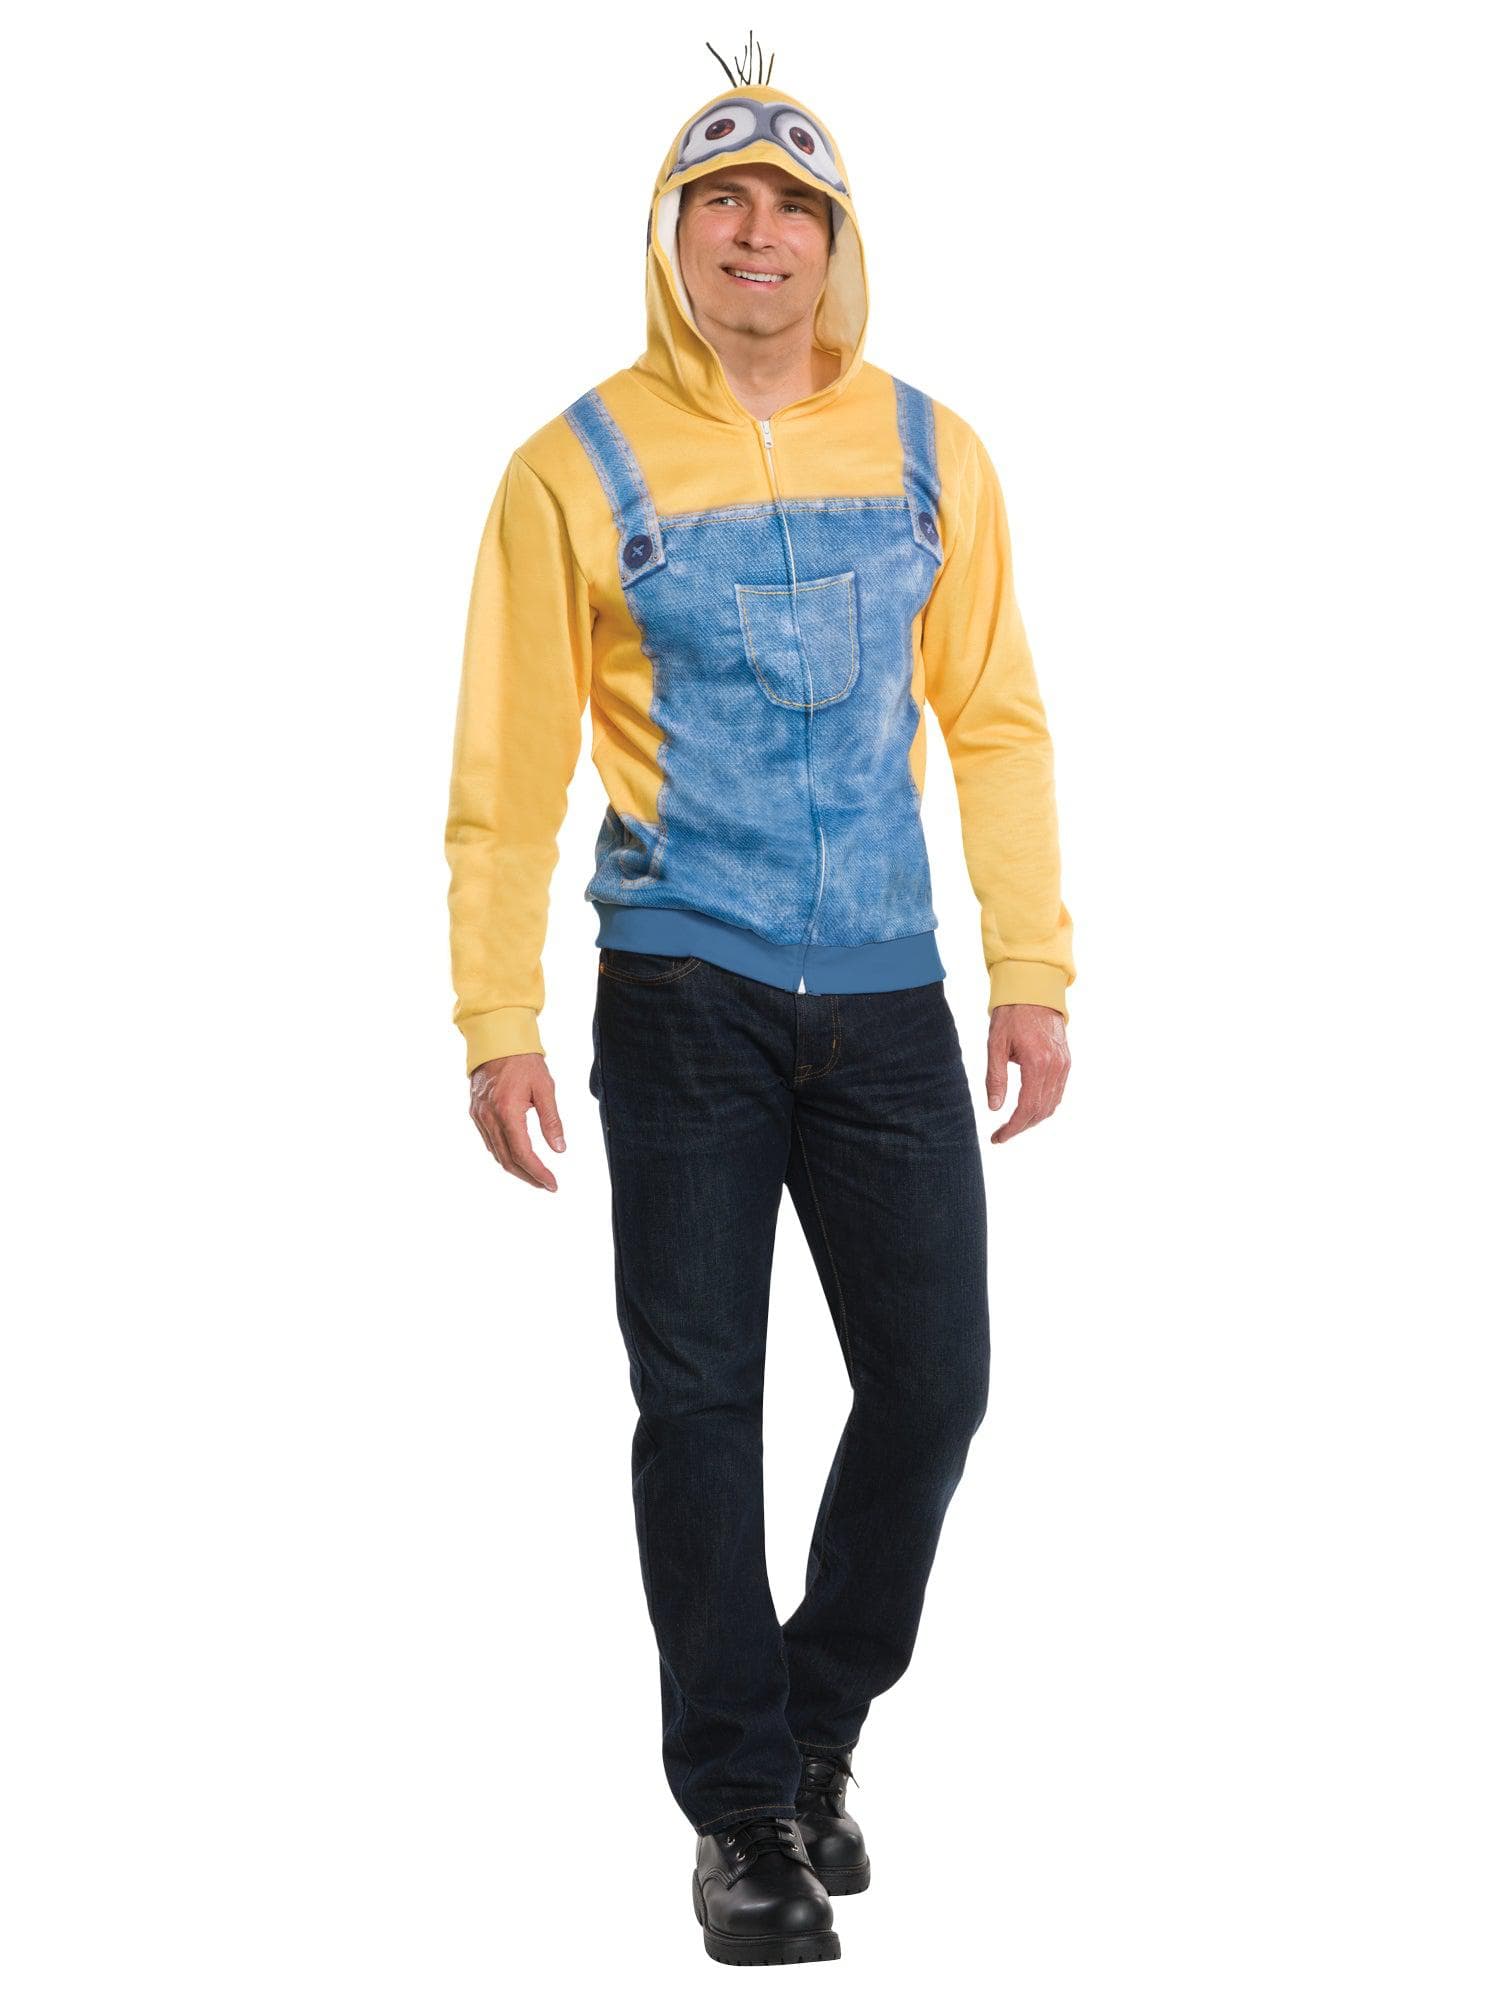 Adult Despicable Me Minion Hooded Top - costumes.com